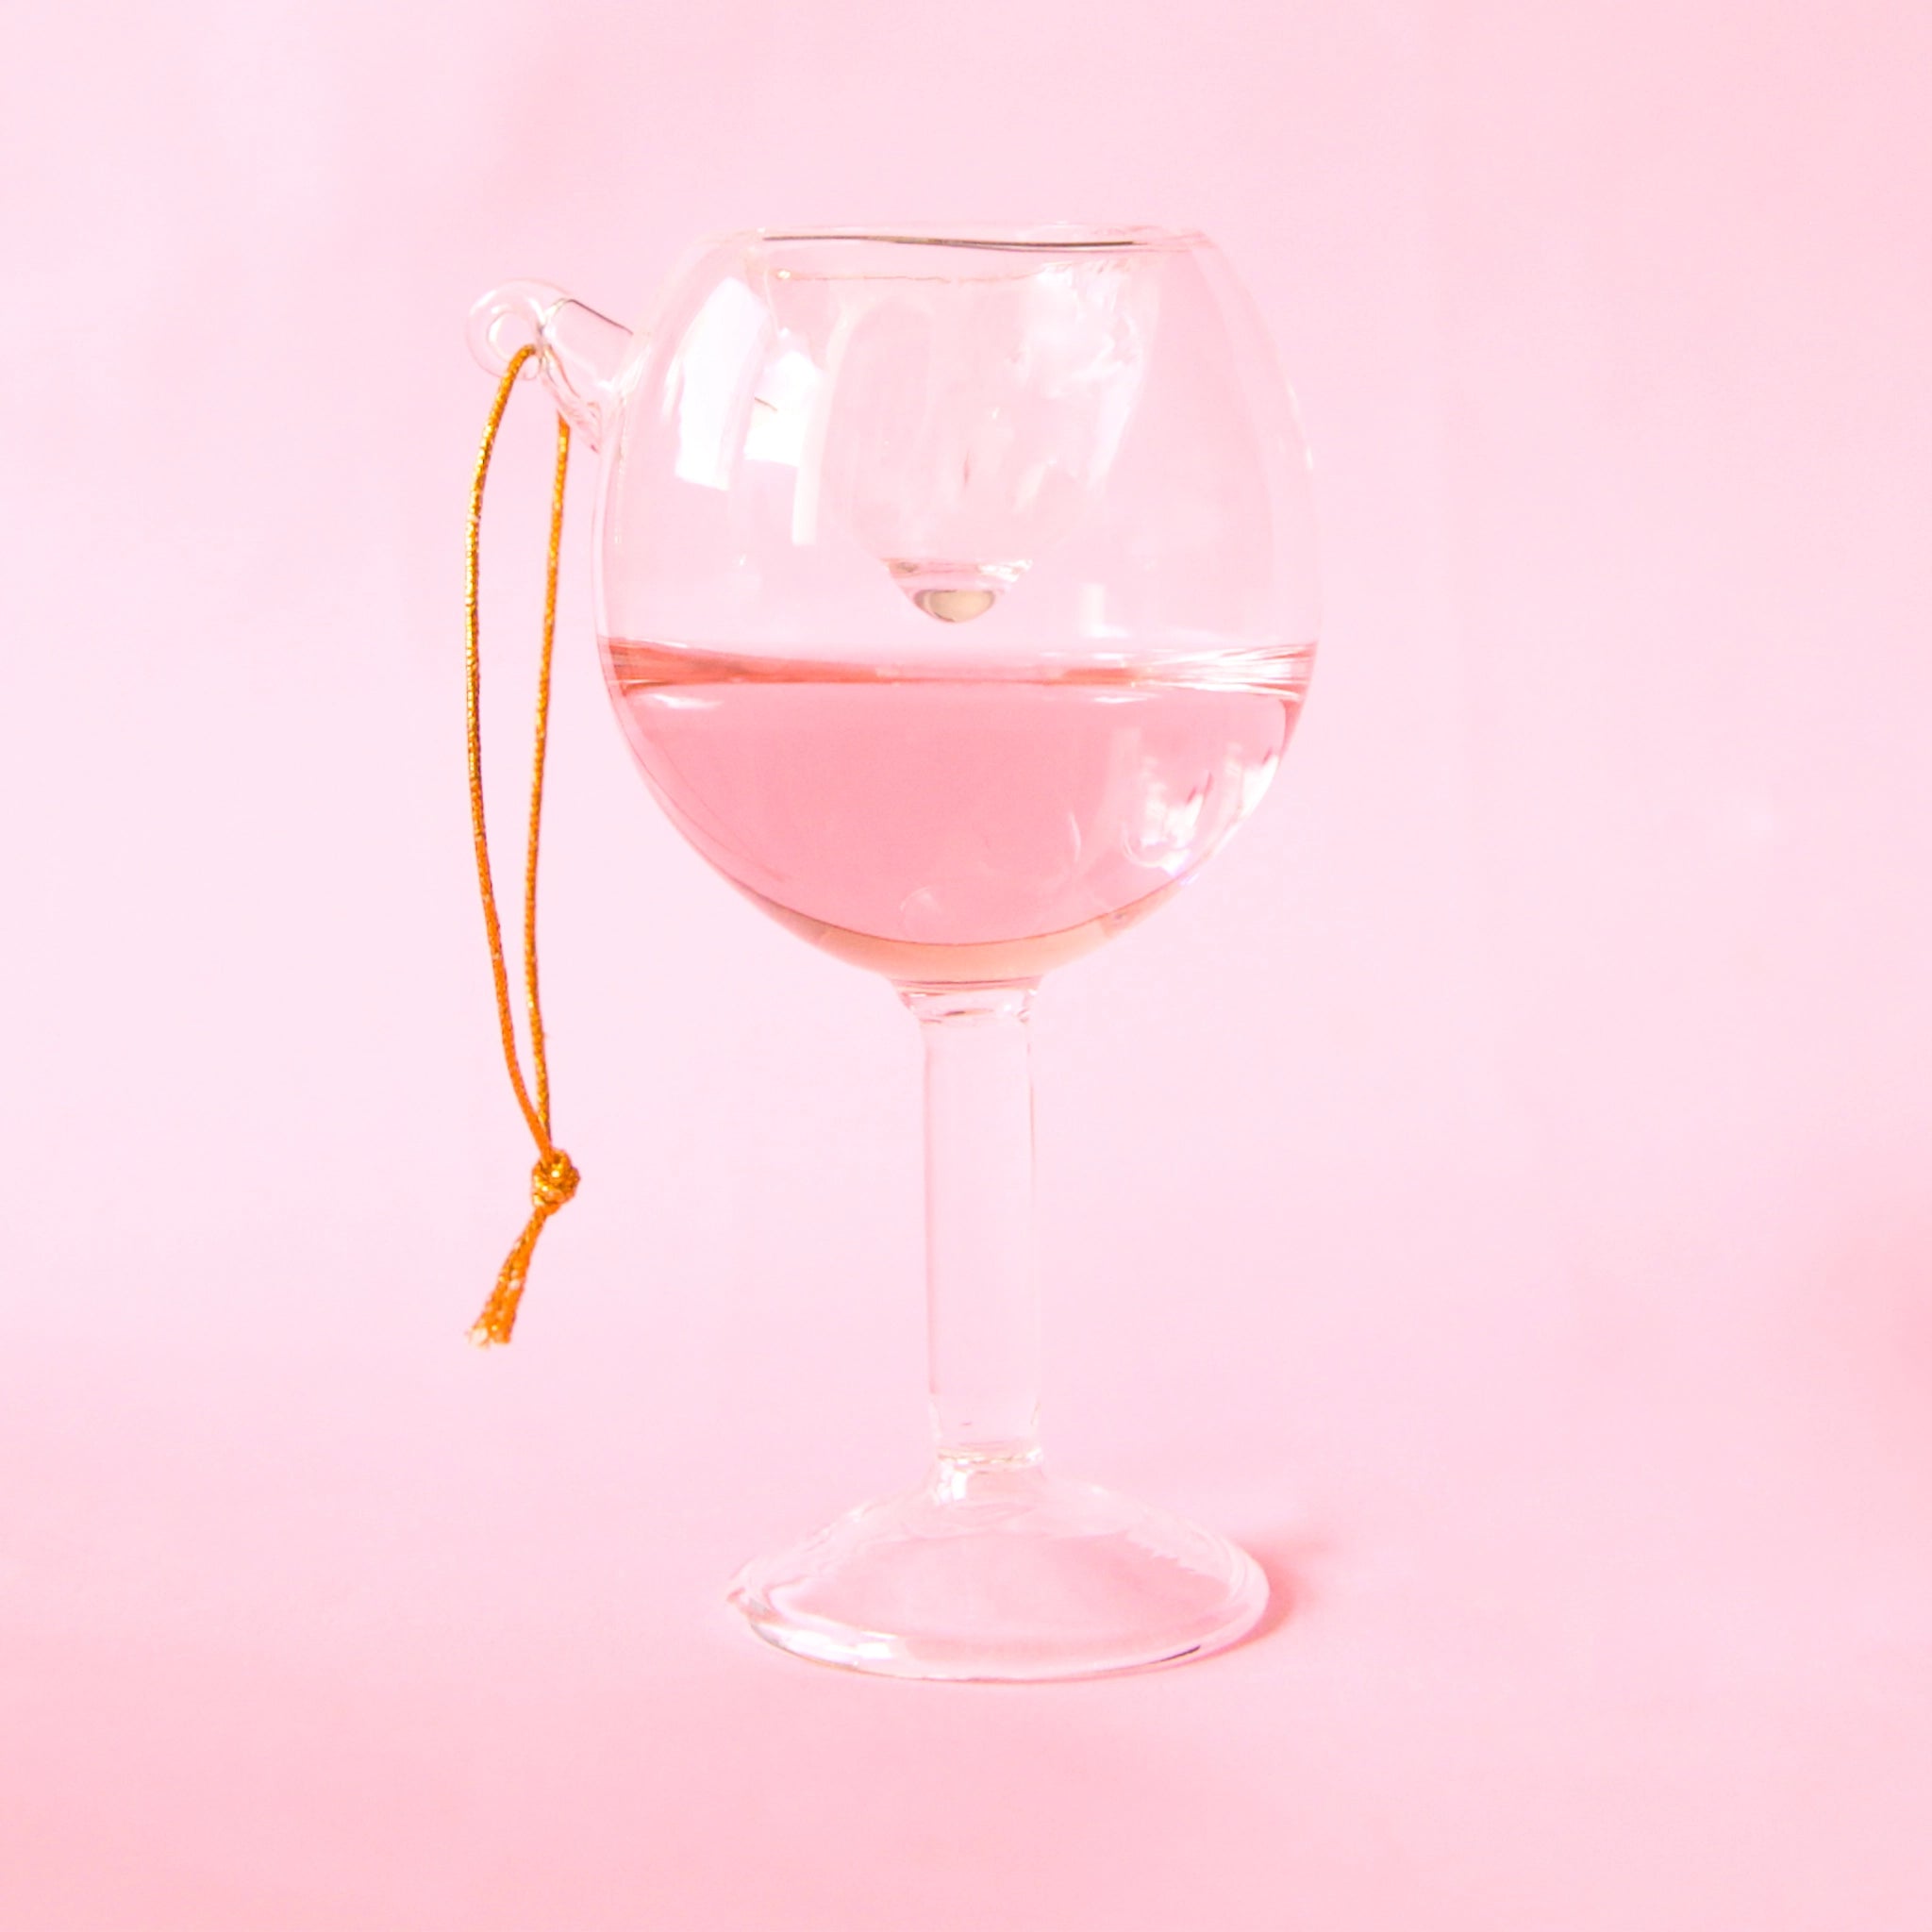 A wine glass ornament features a double lined glass with pink liquid on the inside for some movement!